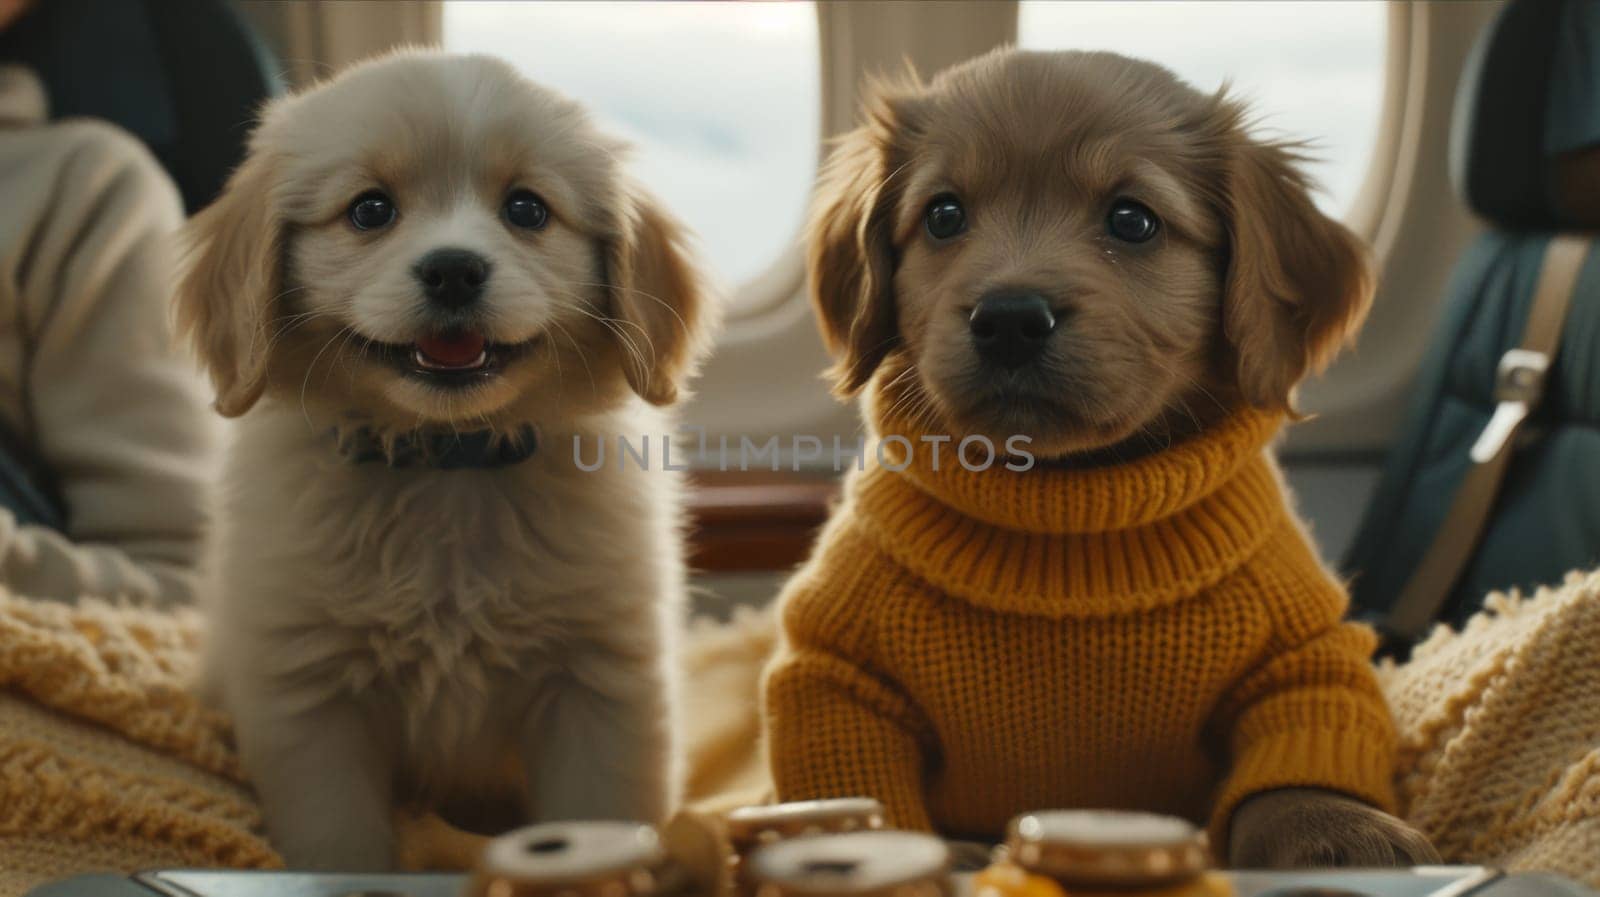 Two dogs in sweaters sitting on a plane next to some food